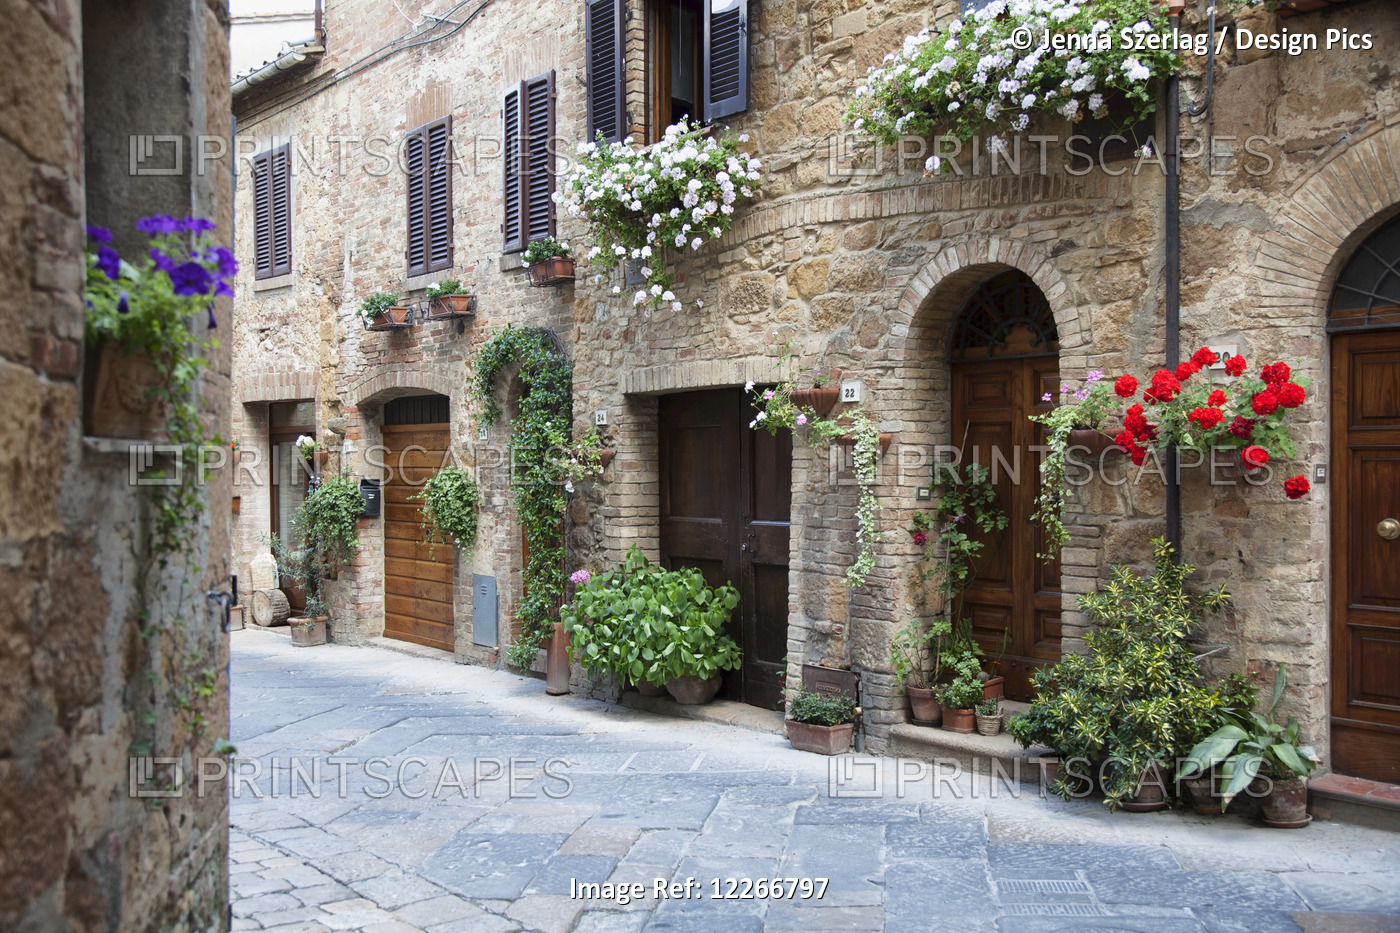 A Quaint Village With Flowers Decorating Residential Buildings; Pienza, ...